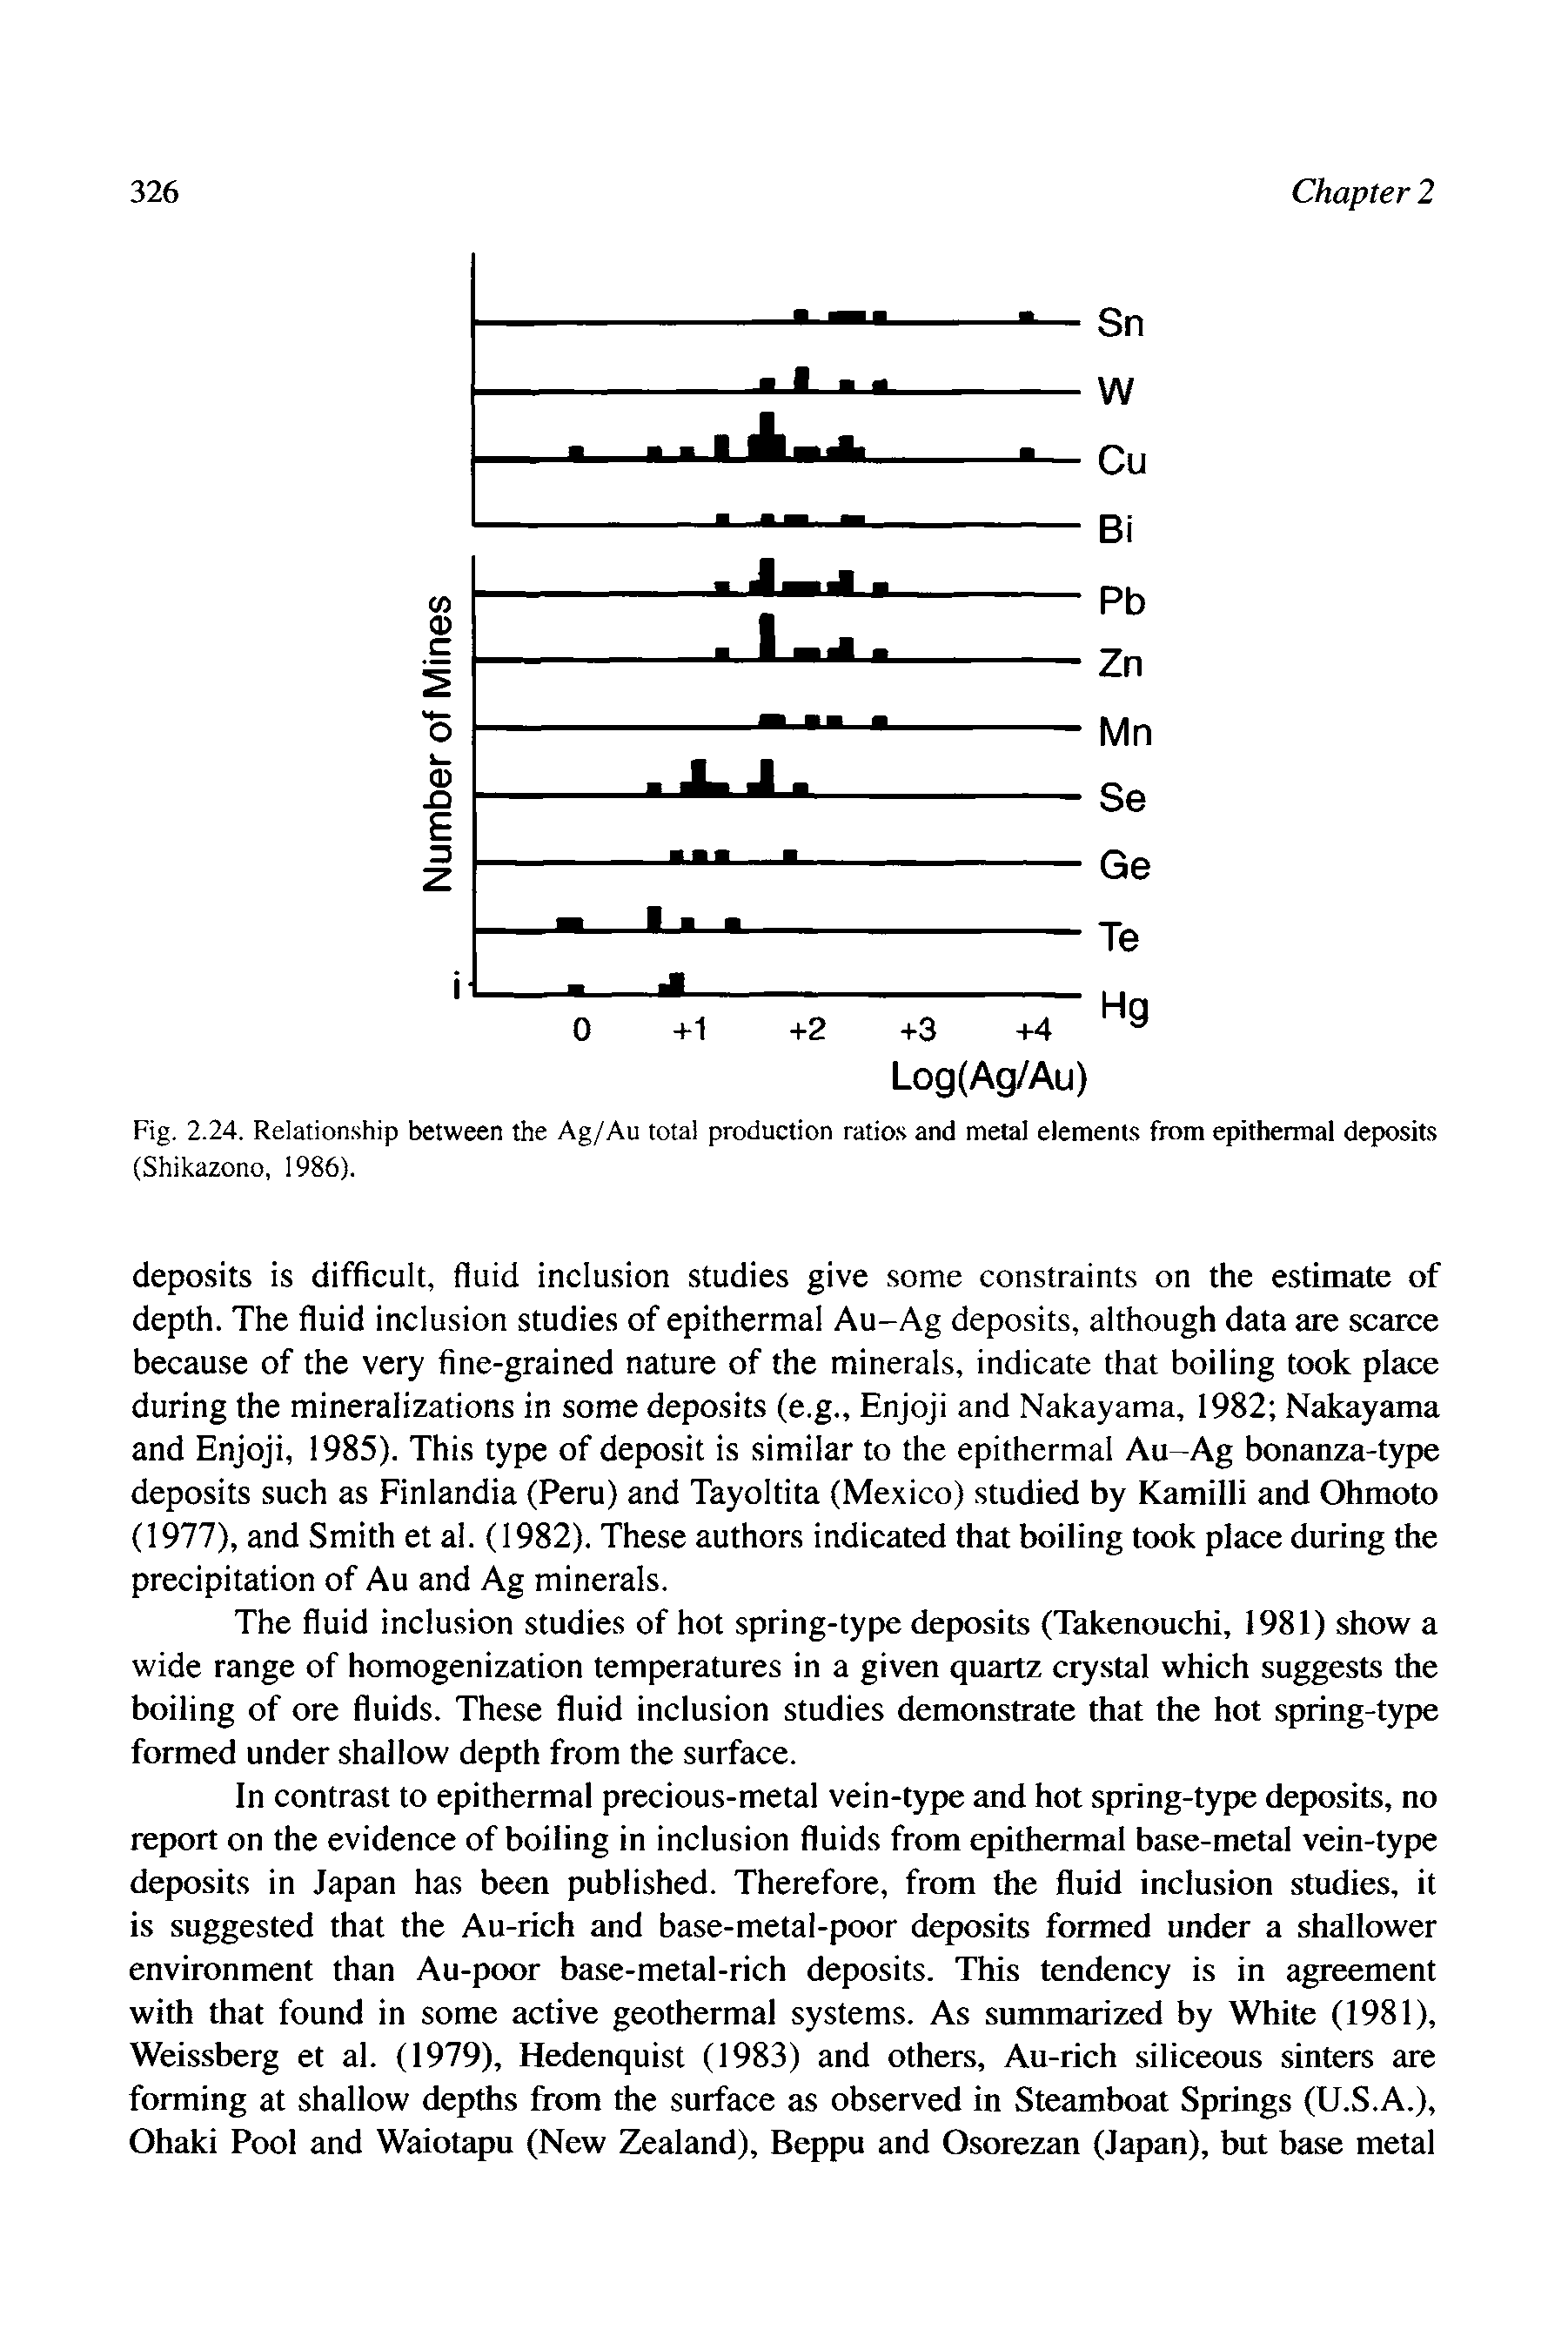 Fig. 2.24. Relationship between the Ag/Au total production ratios and metal elements from epithermal deposits (Shikazono, 1986).